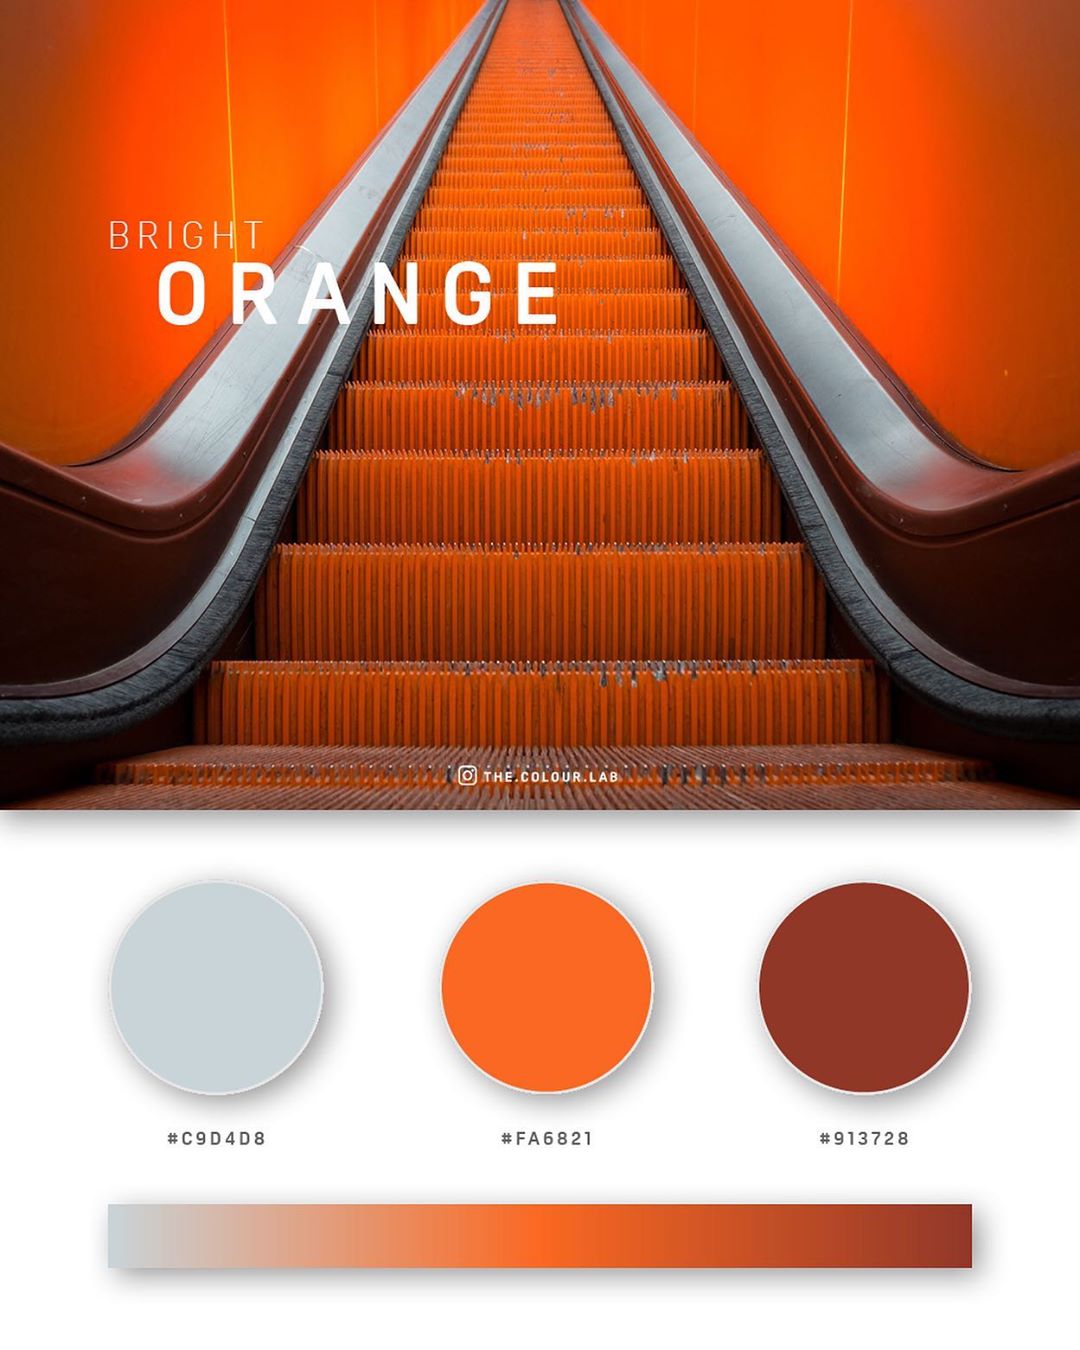 How to make your own color palettes, by Greg Gunn